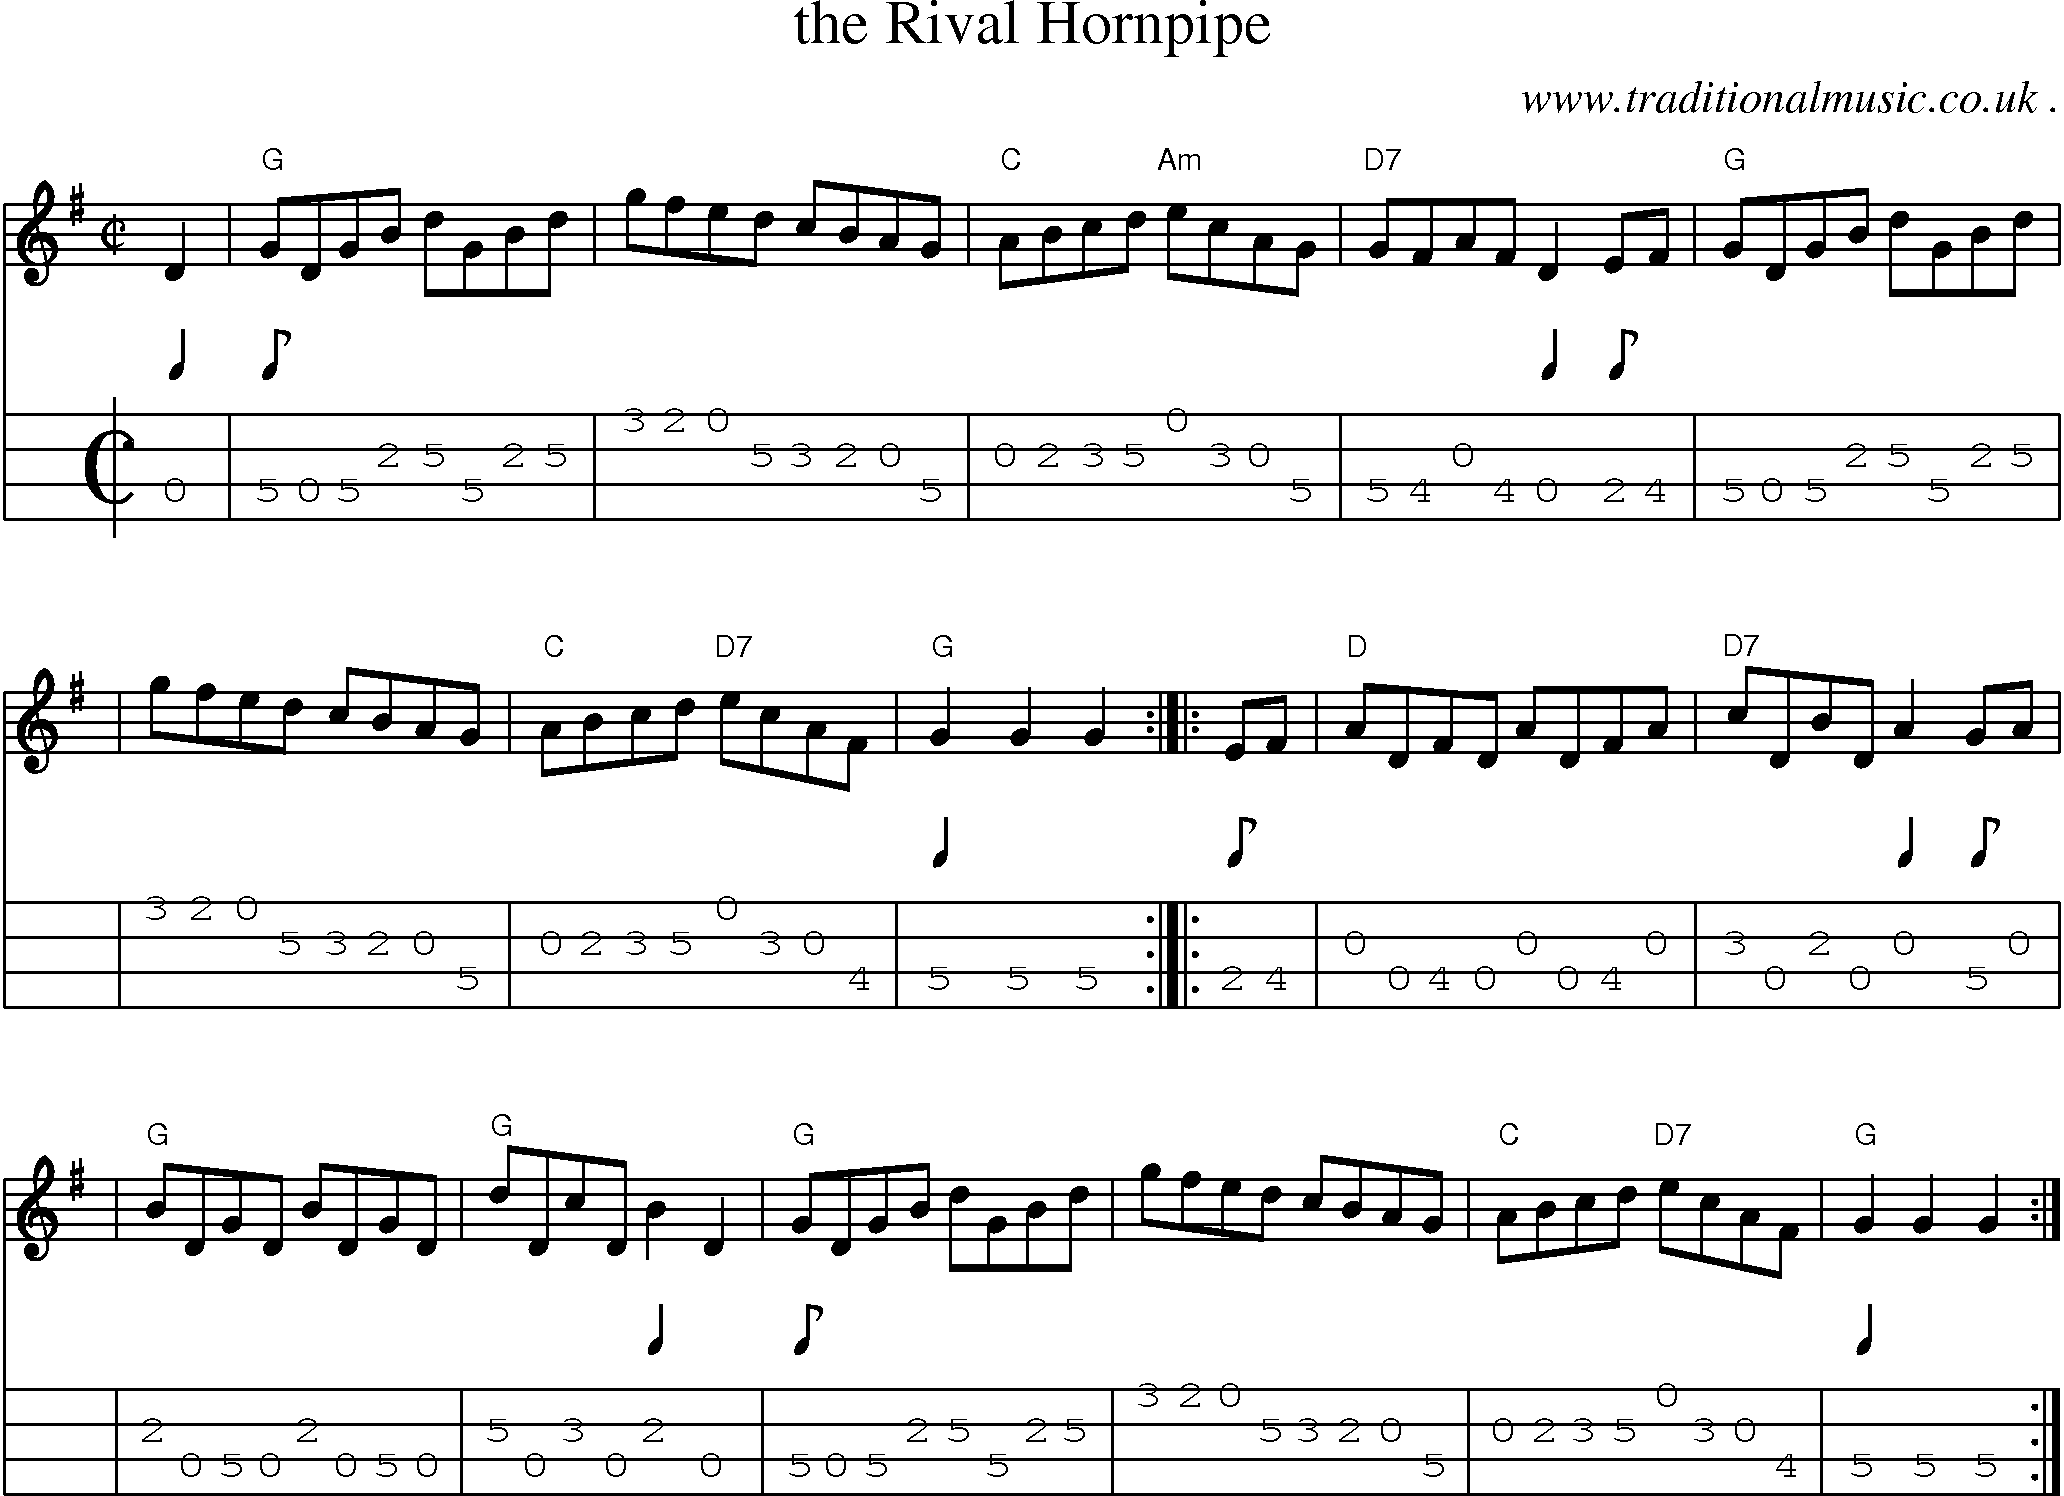 Sheet-music  score, Chords and Mandolin Tabs for The Rival Hornpipe